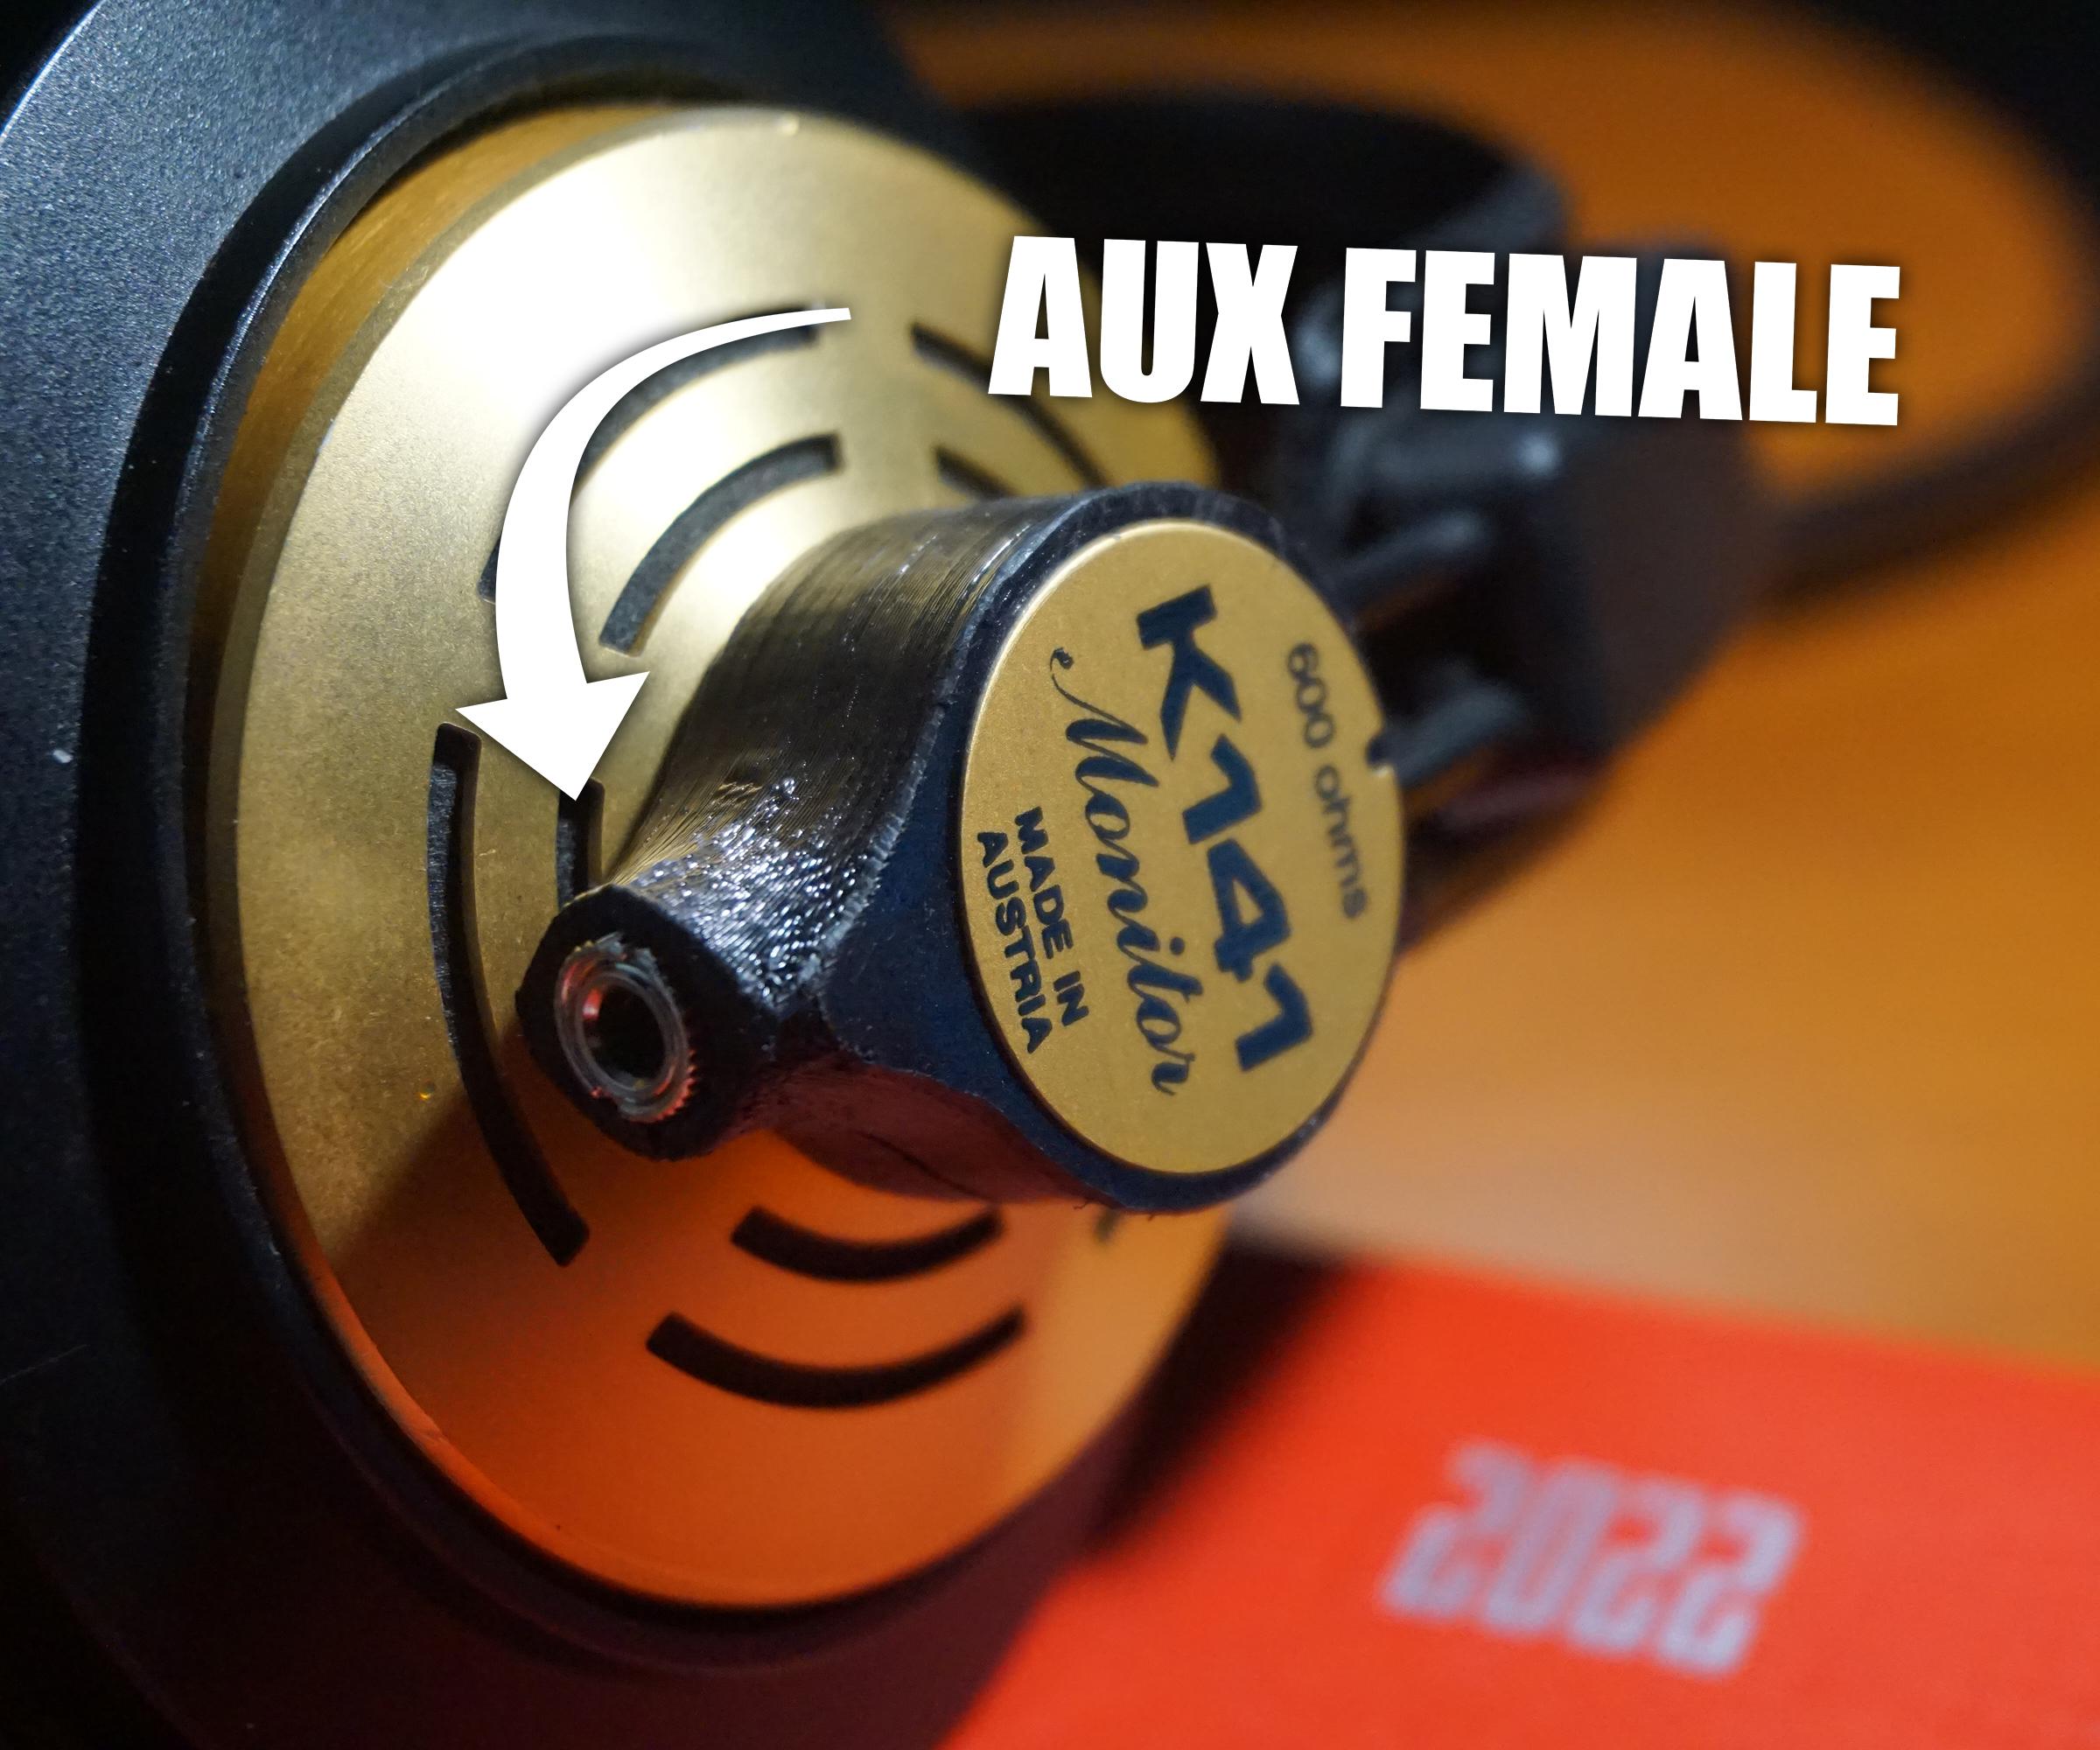 Adding a Female Aux Jack to Your Old Headphone - the Best Upgrade You Can Do!